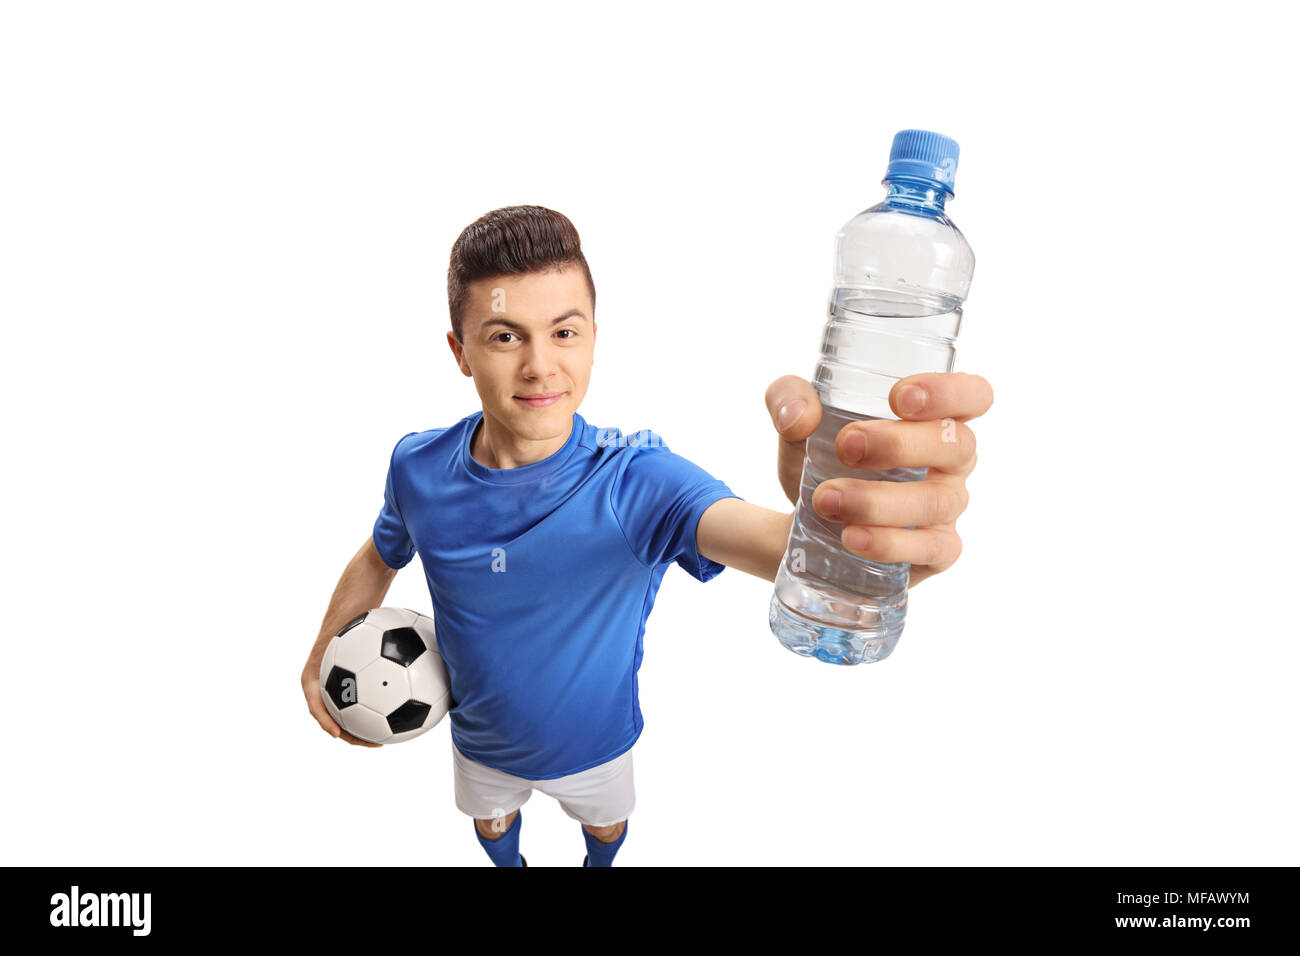 Teenage soccer player with a football and a bottle of water isolated on white background Stock Photo